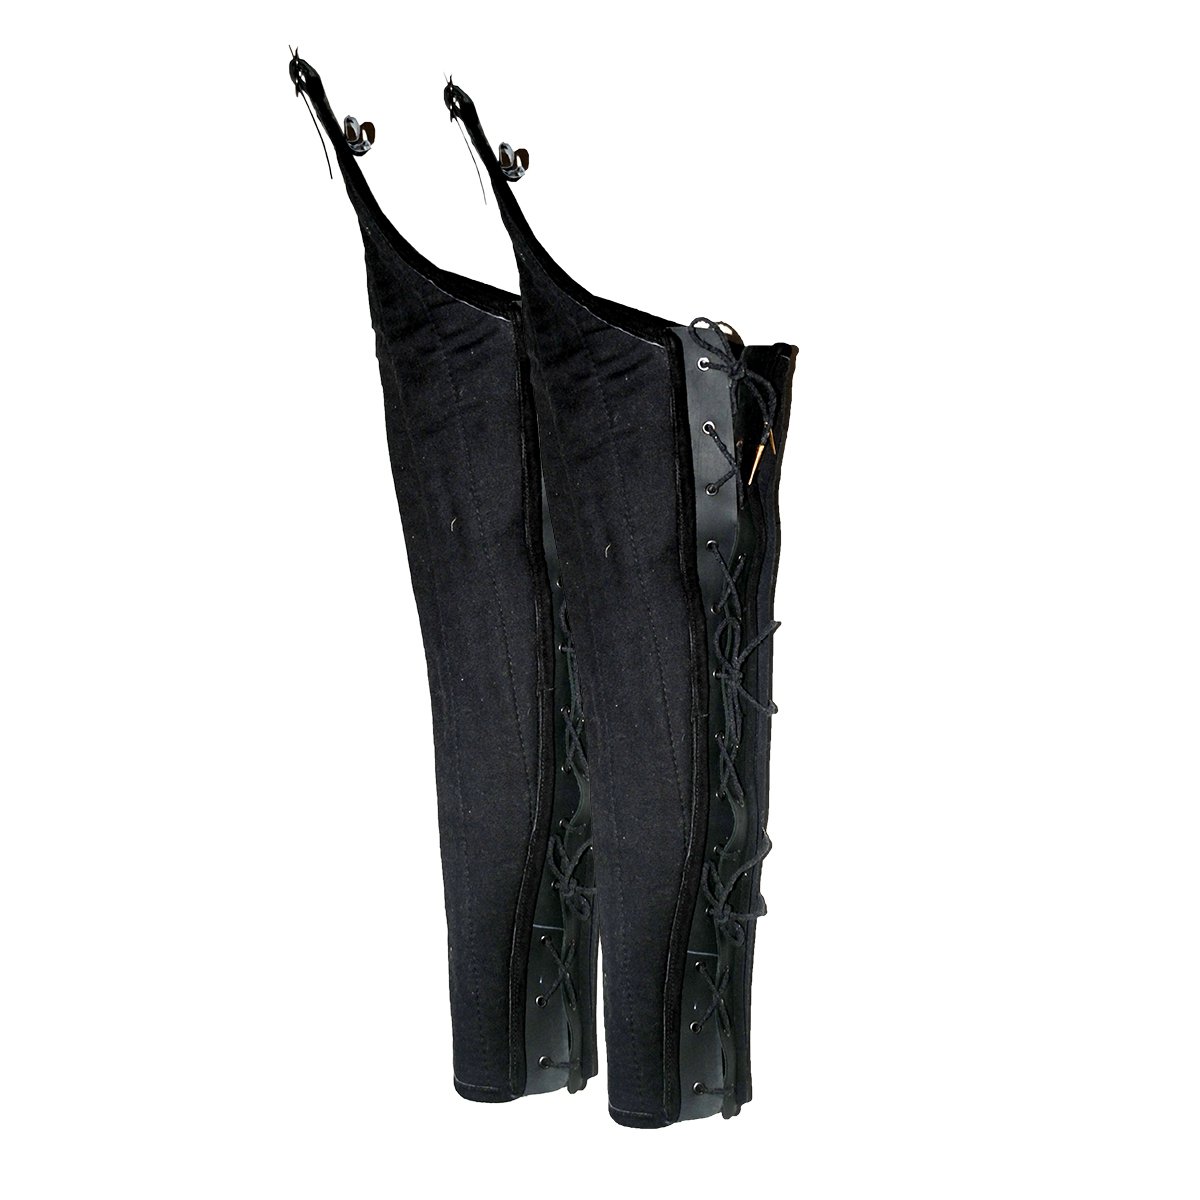 Crusader Padded Trousers - black, Size M